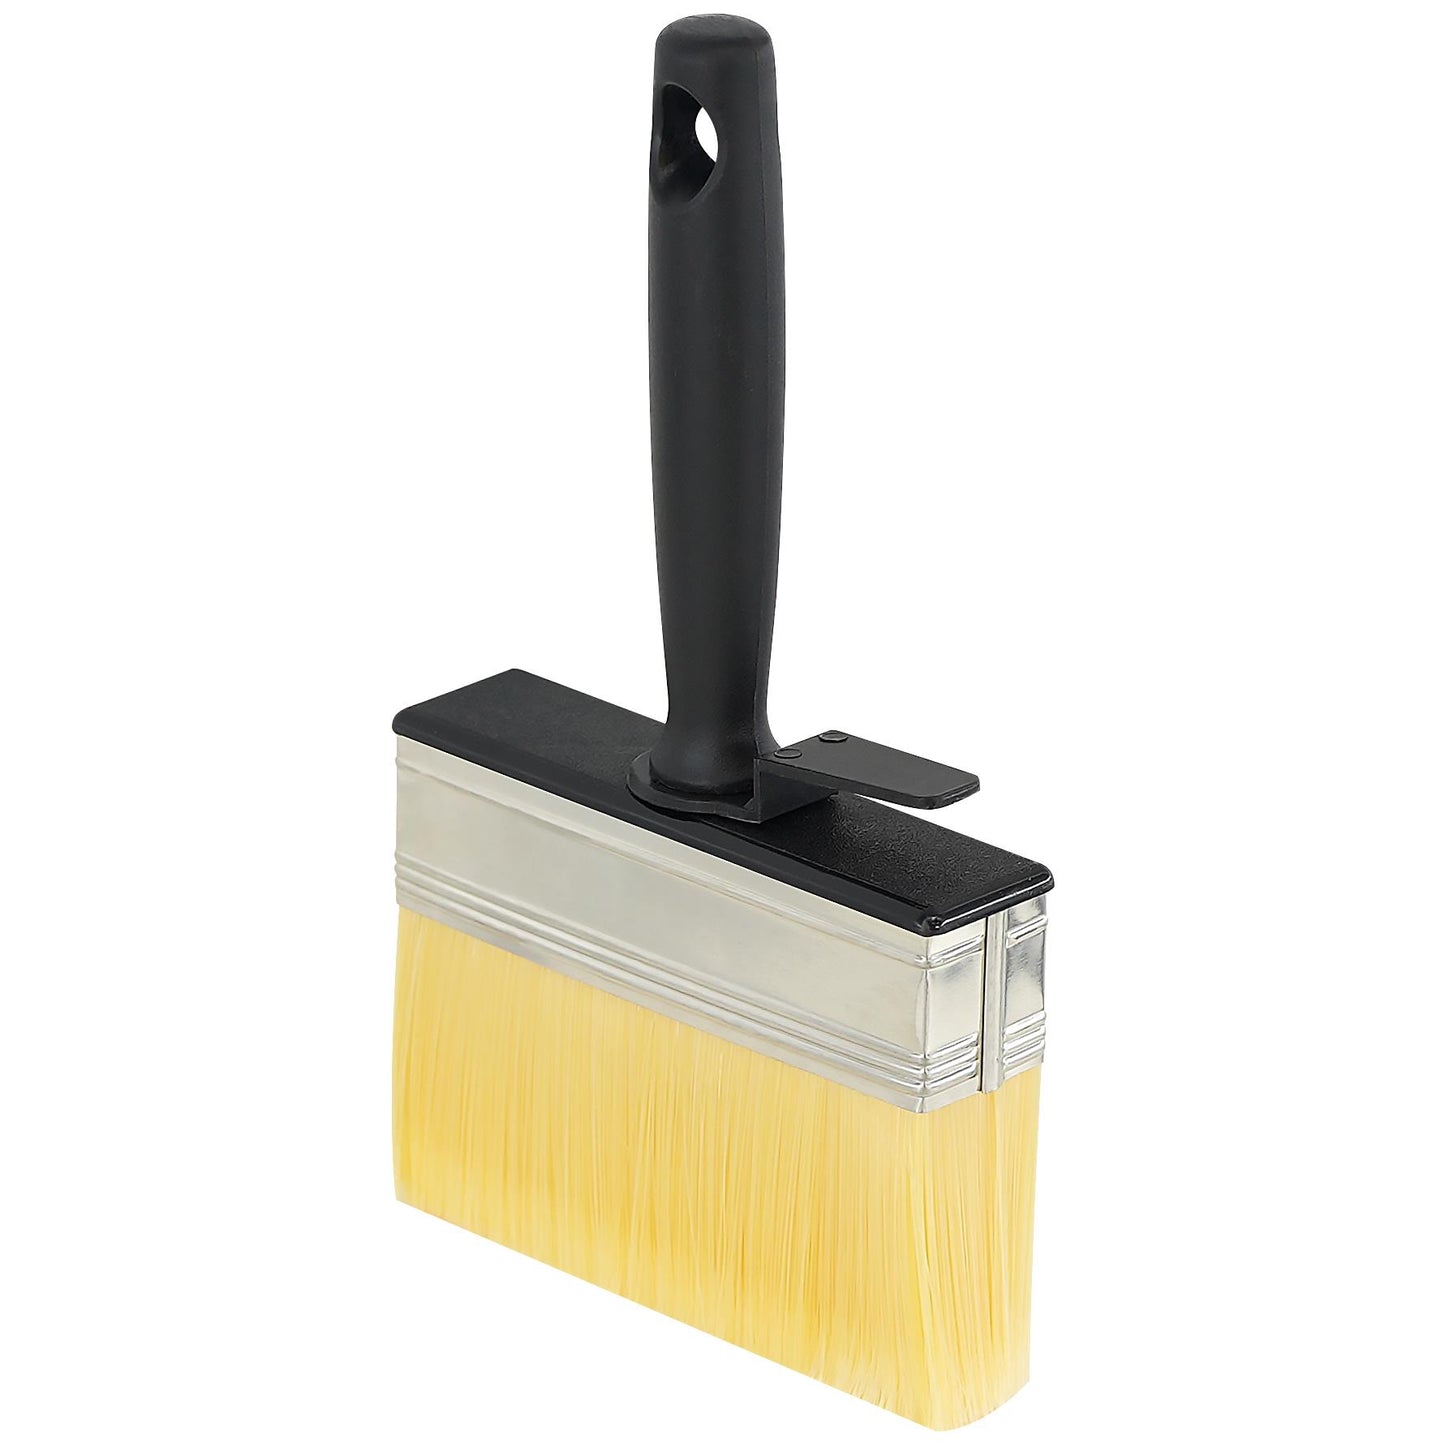 Shed & Fence Paint Brush With a Clip by GEEZY - UKBuyZone